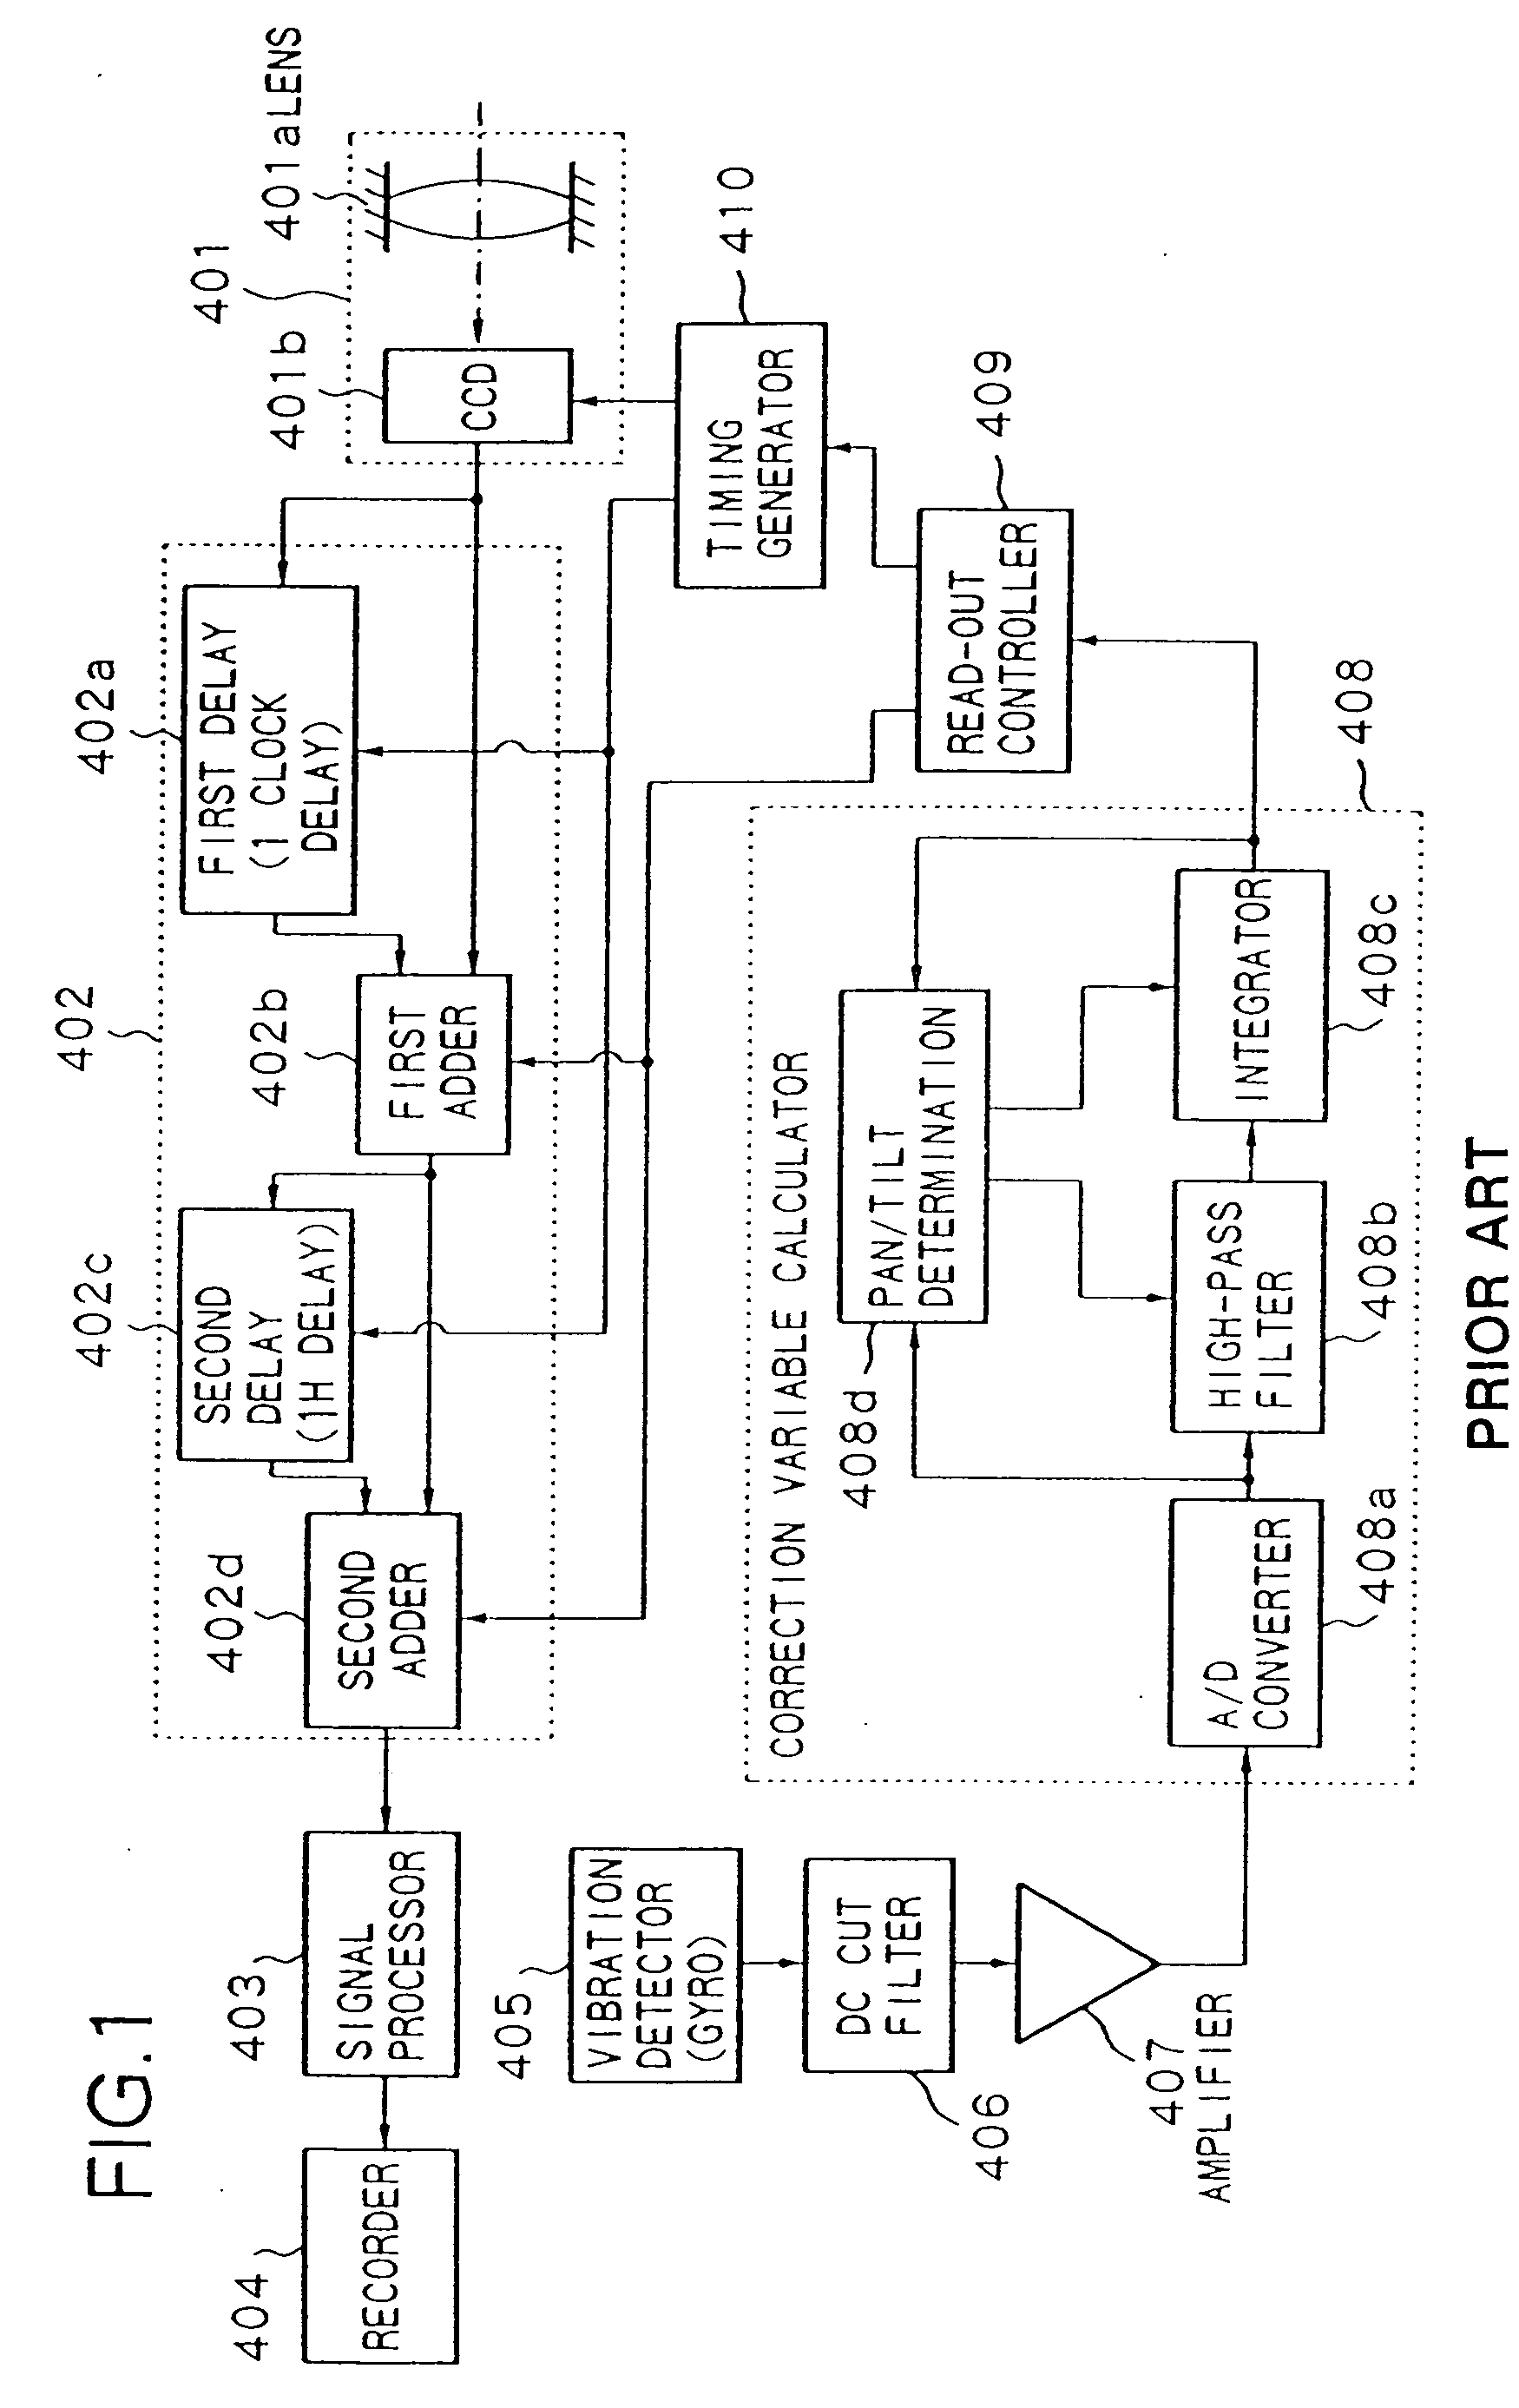 Method and apparatus for image sensing